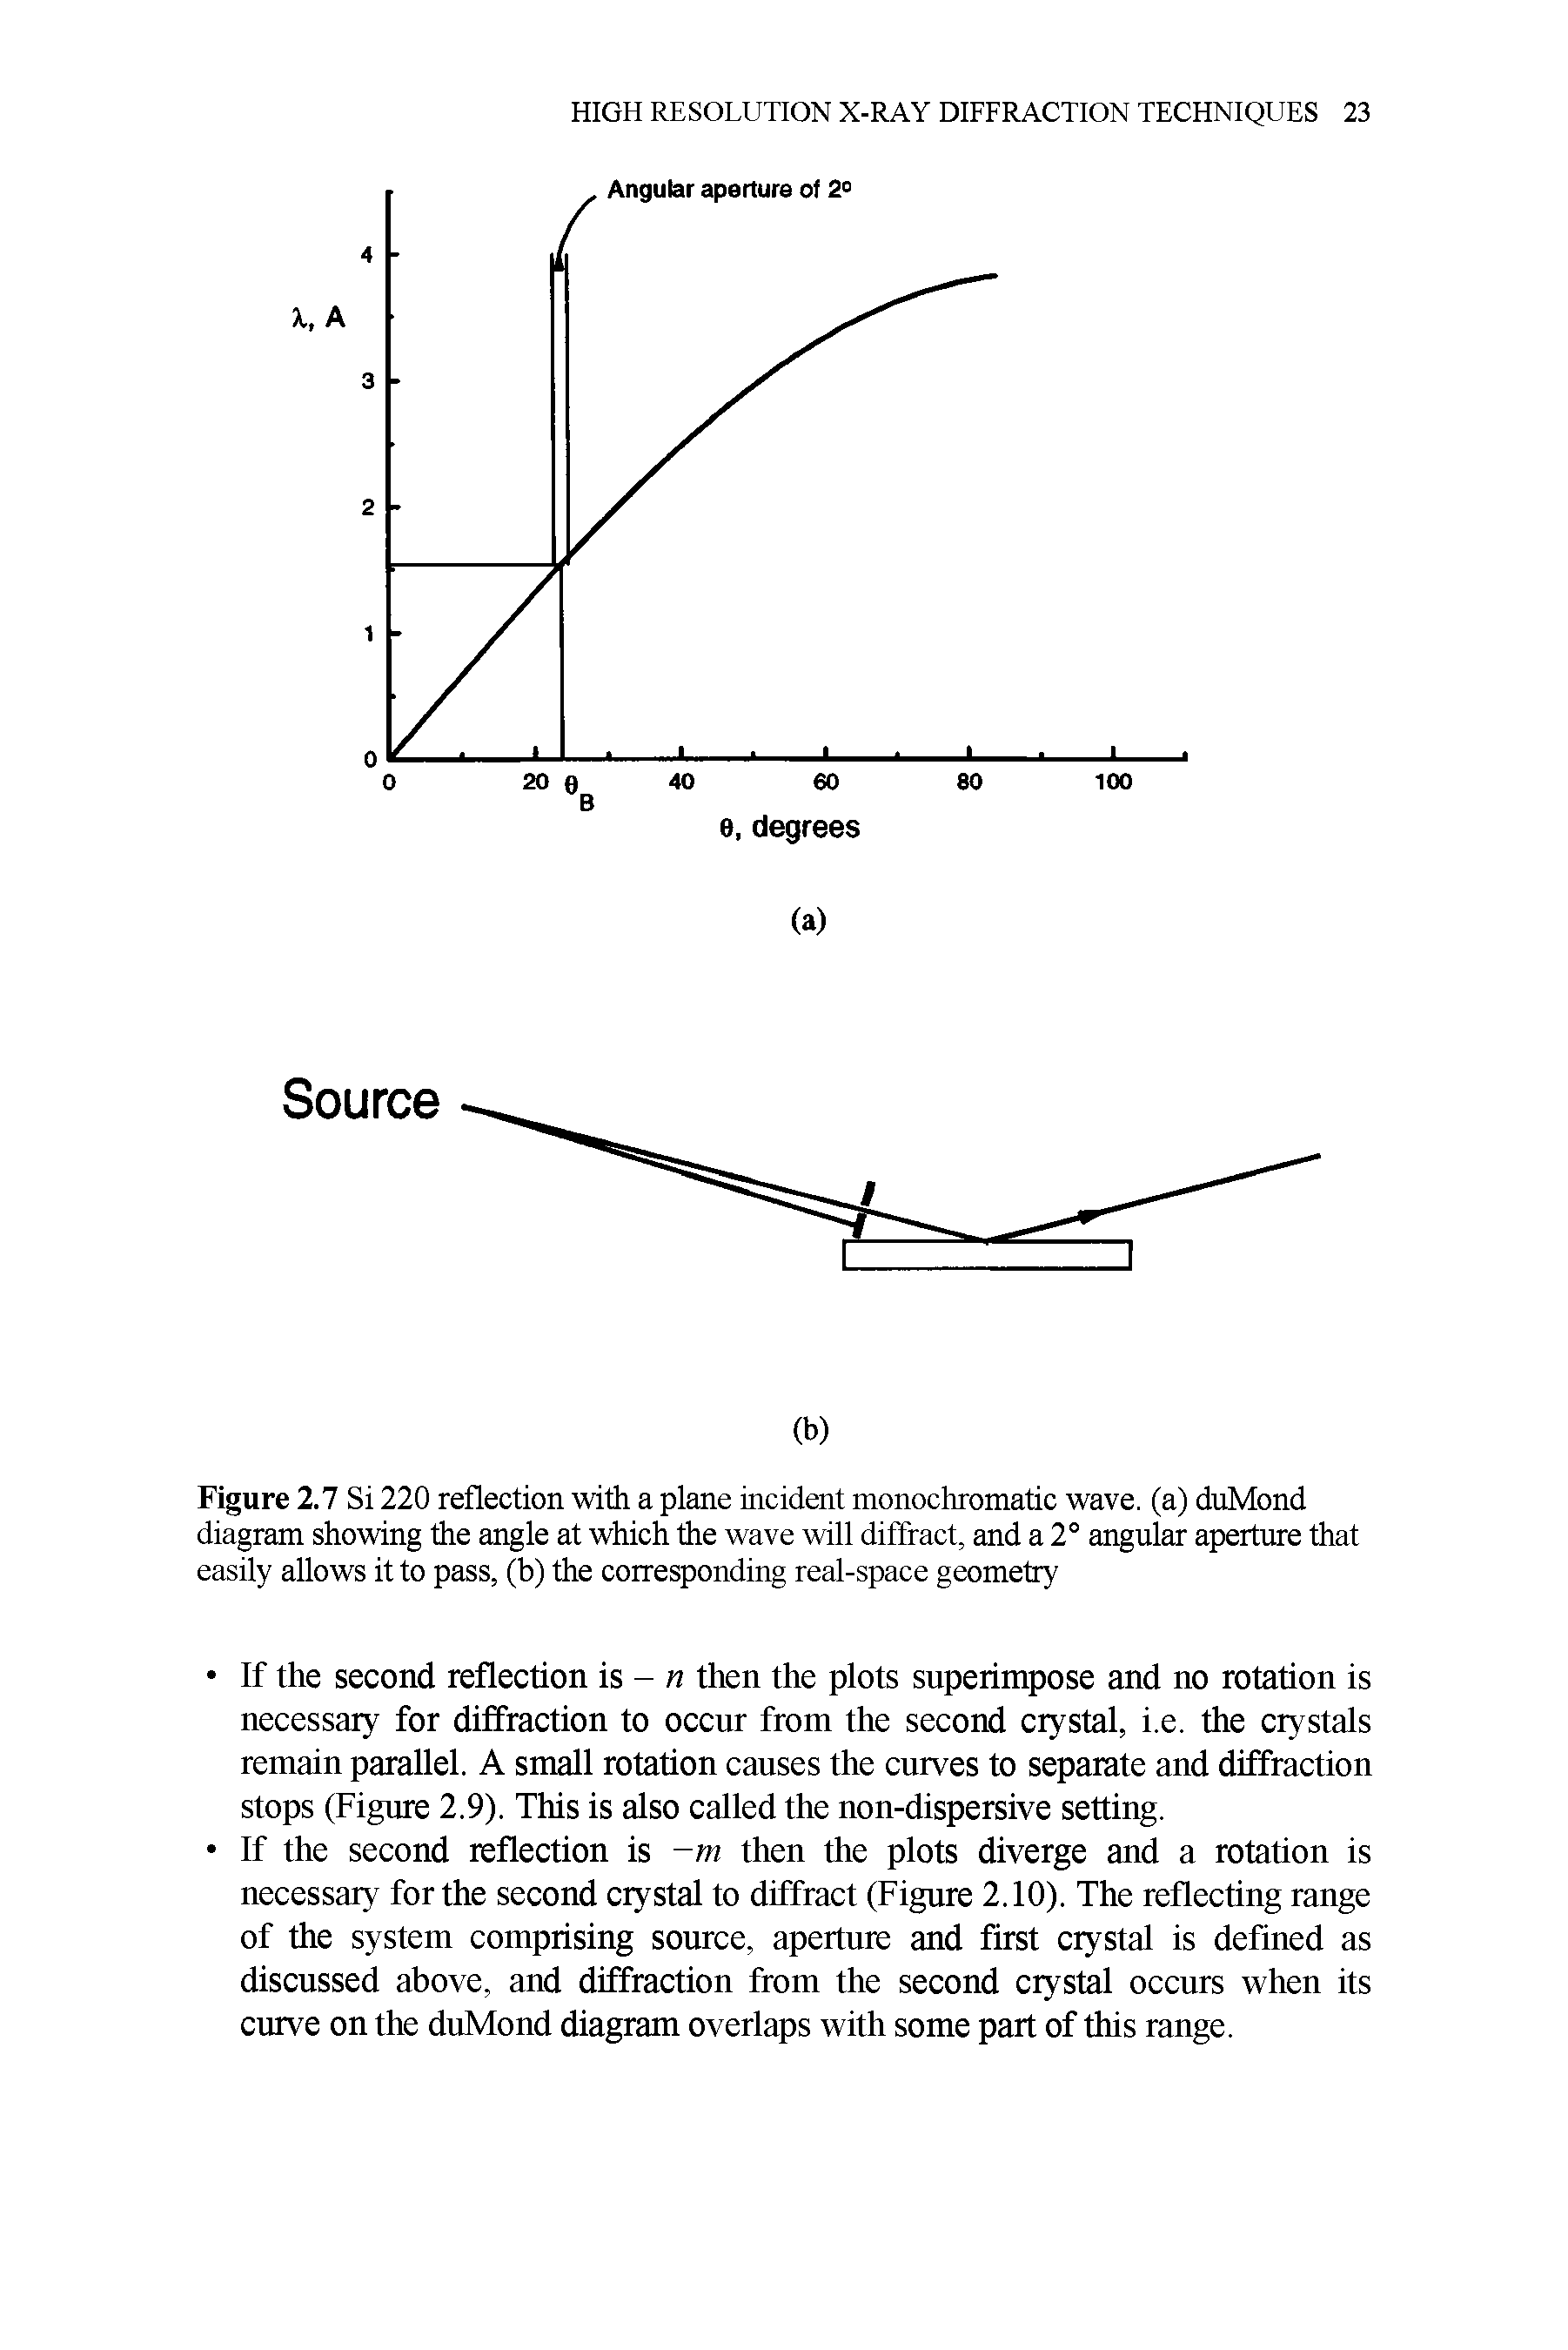 Figure 2.7 Si 220 reflection with a plane incident monochromatic wave, (a) duMond diagram showing the angle at which the wave will diffract, and a 2° angular aperture that easily allows it to pass, (b) the corresponding real-space geometry...